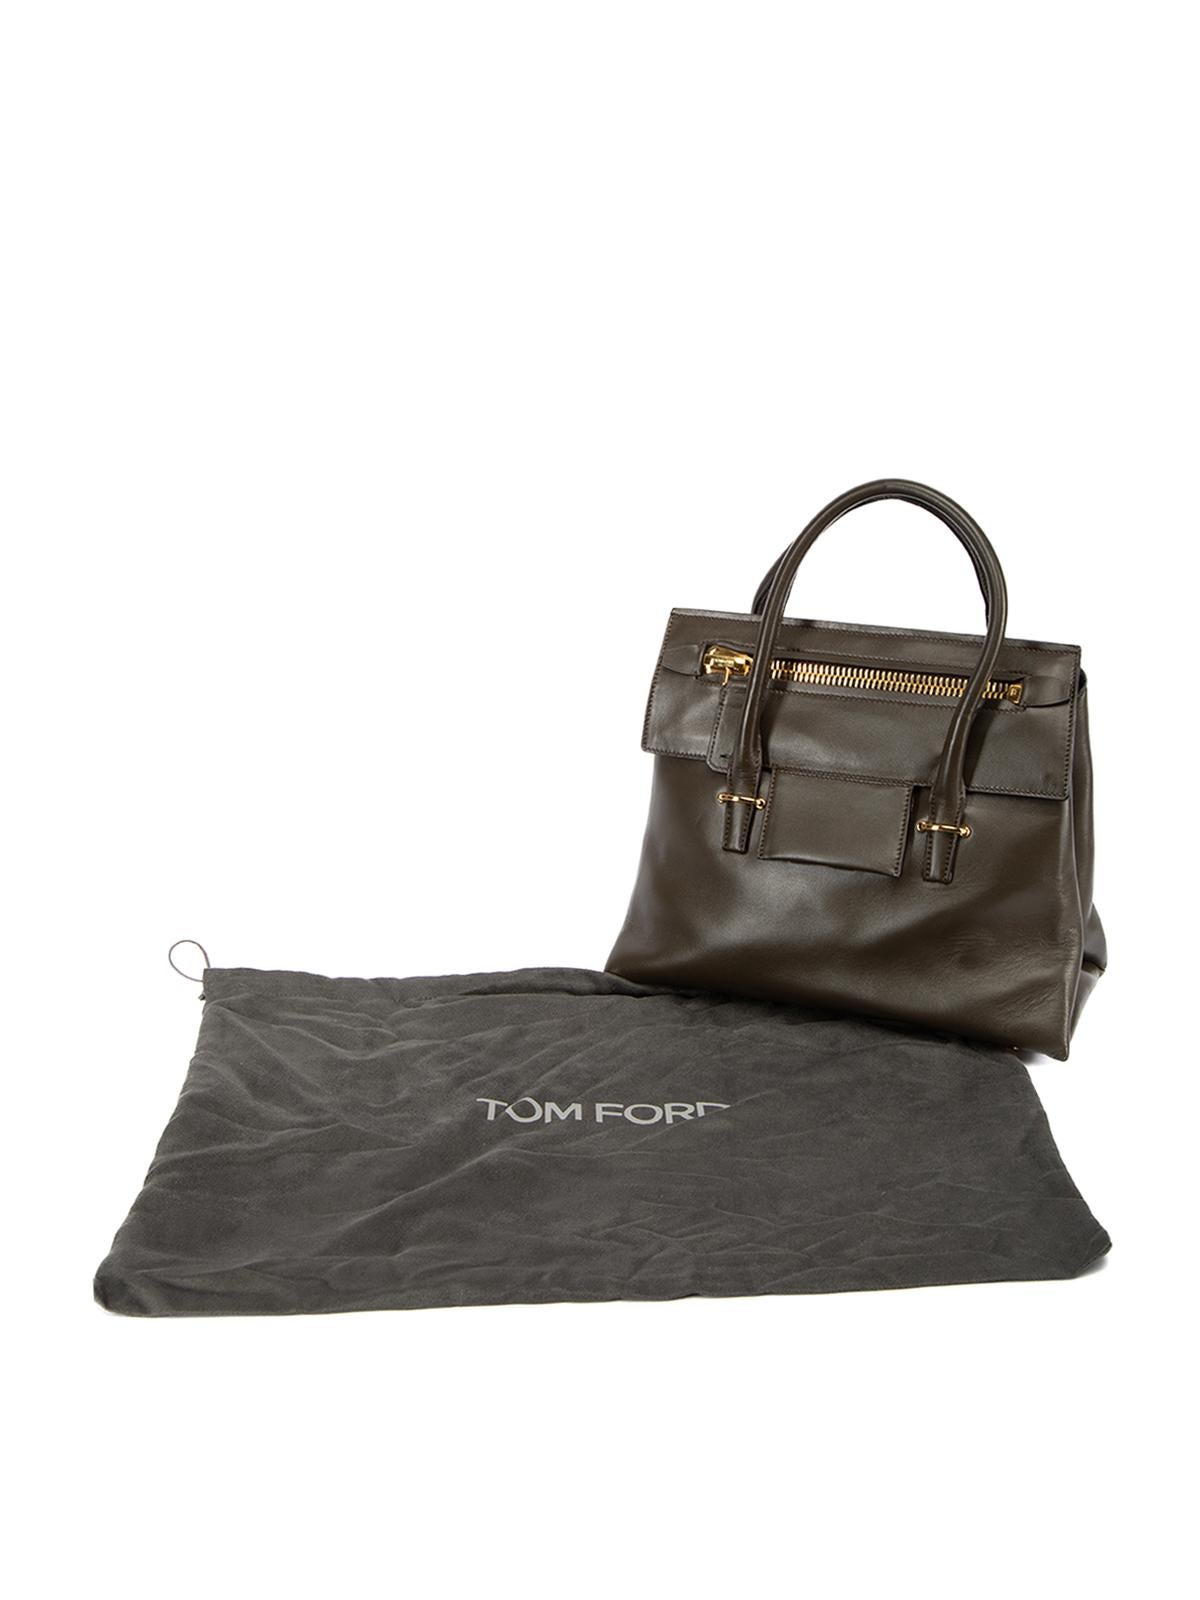 Pre-Loved Tom Ford Women's TF Icon Brown Satchel Bag 4